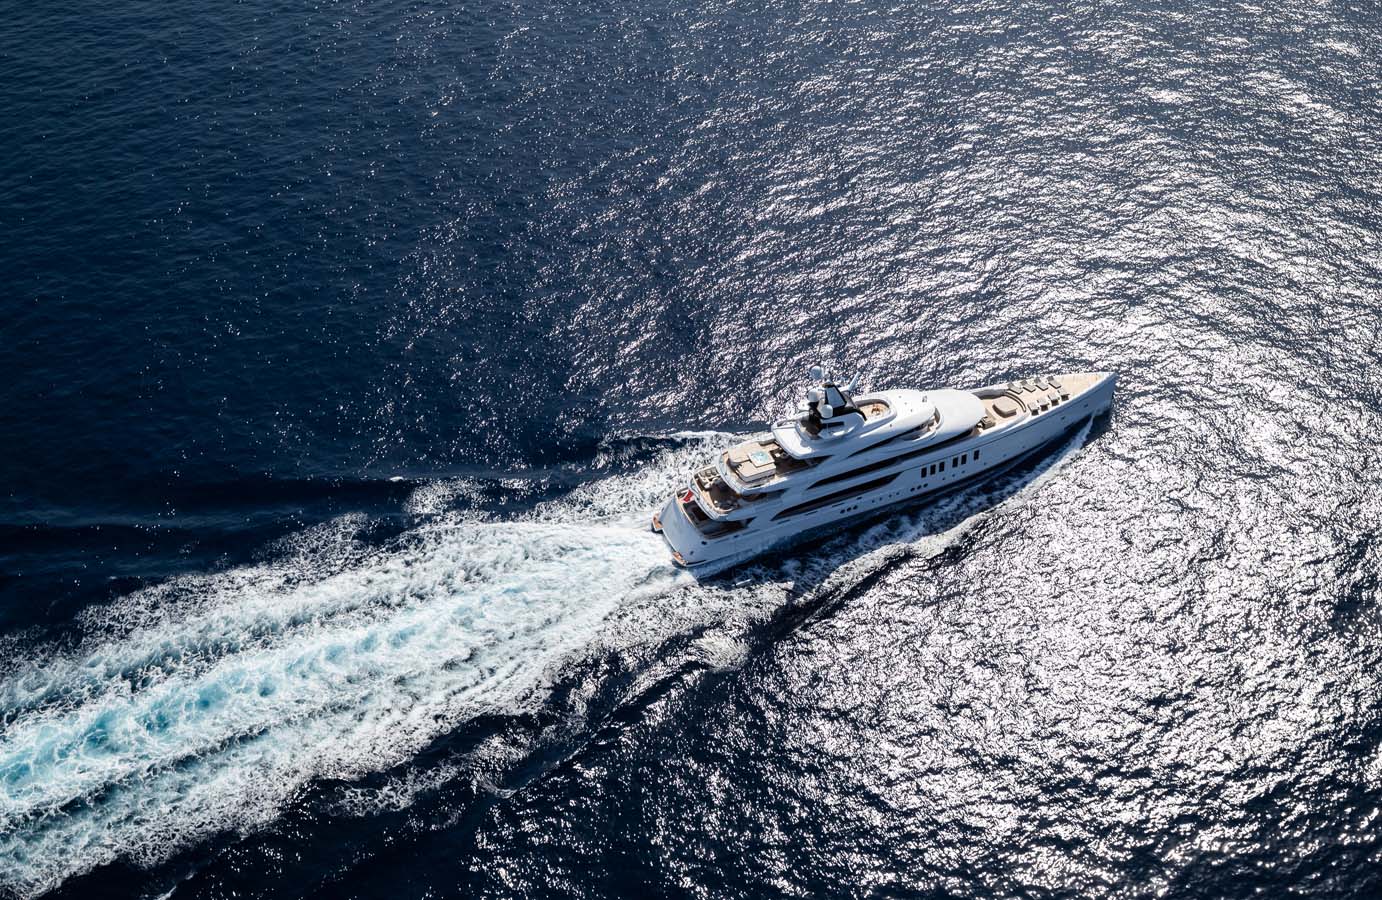 Running Aerial View Of The Yacht 